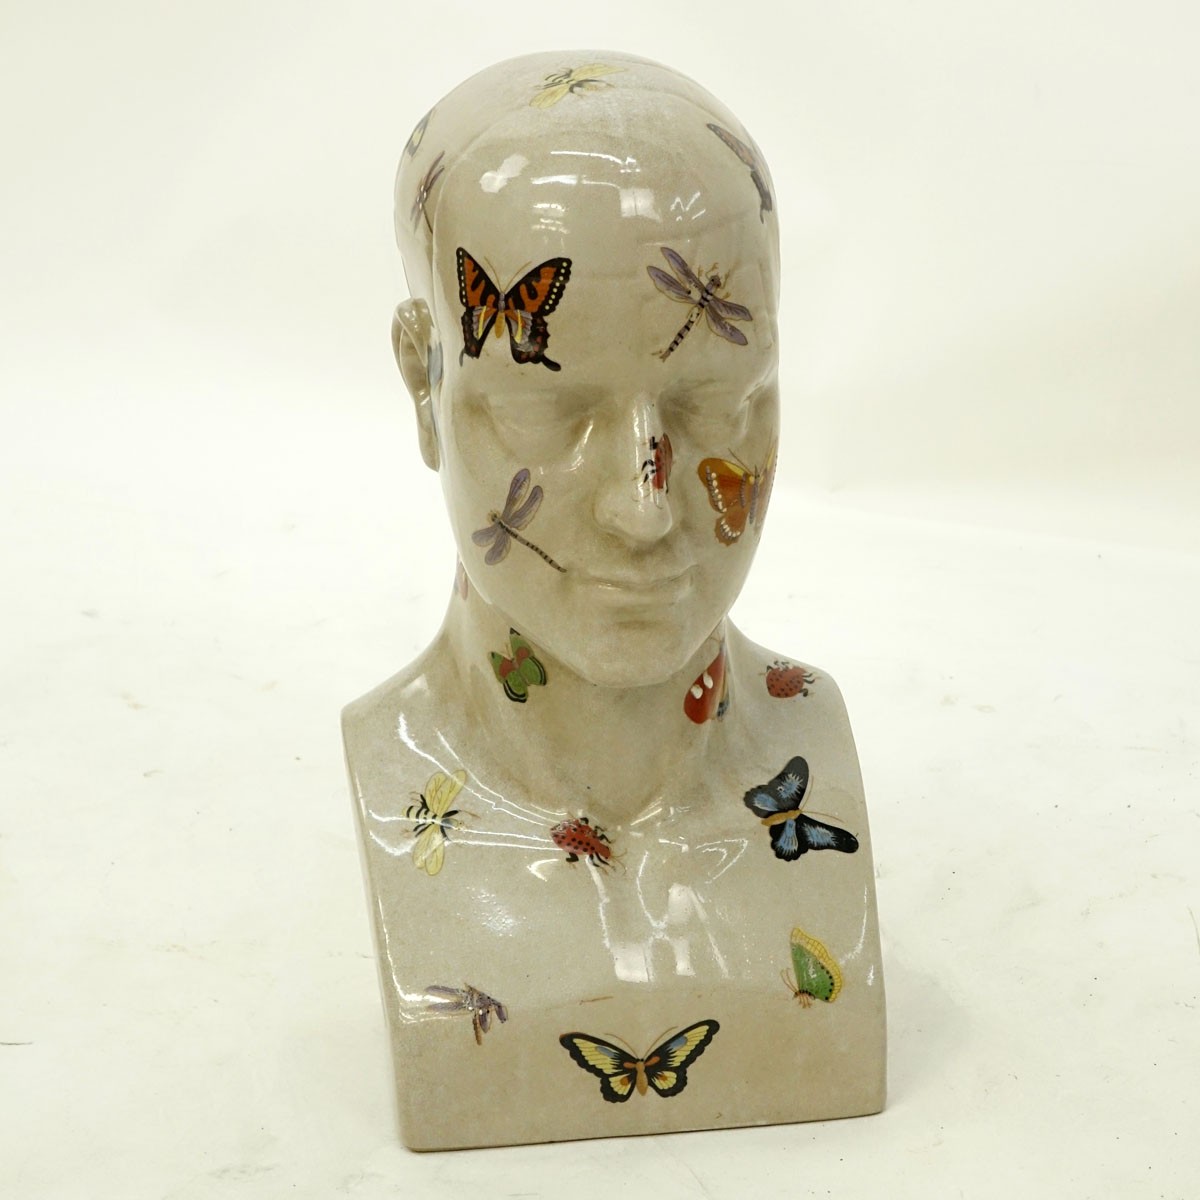 Large French Style Faience Bust of a Male Figure with Insects Motif. Unsigned.